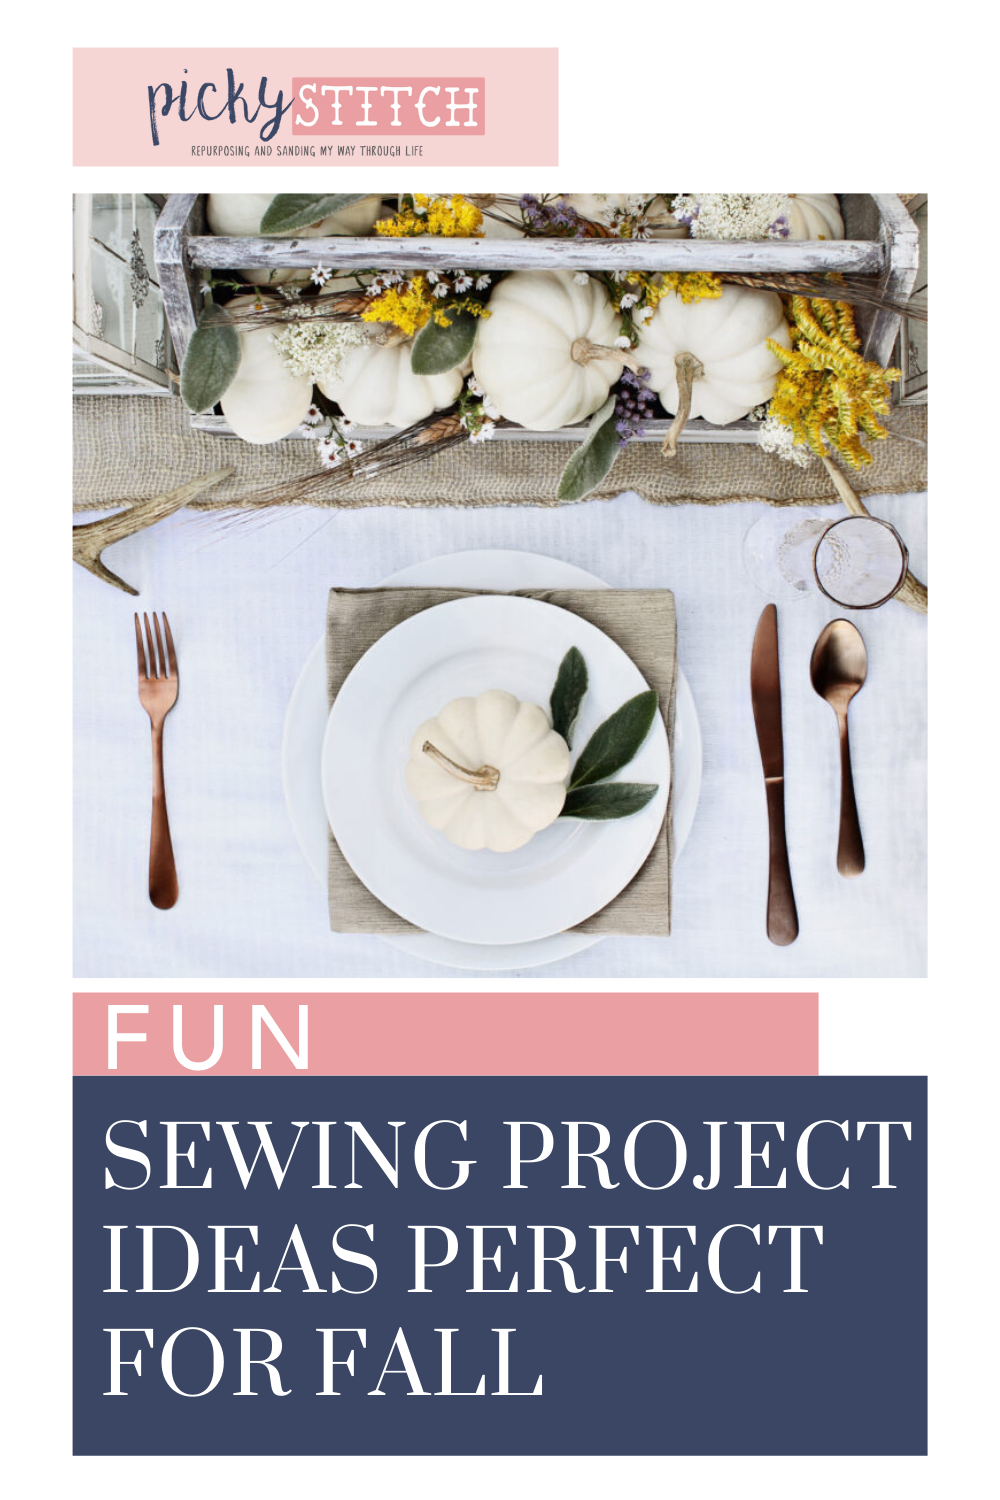 Fall Sewing Projects